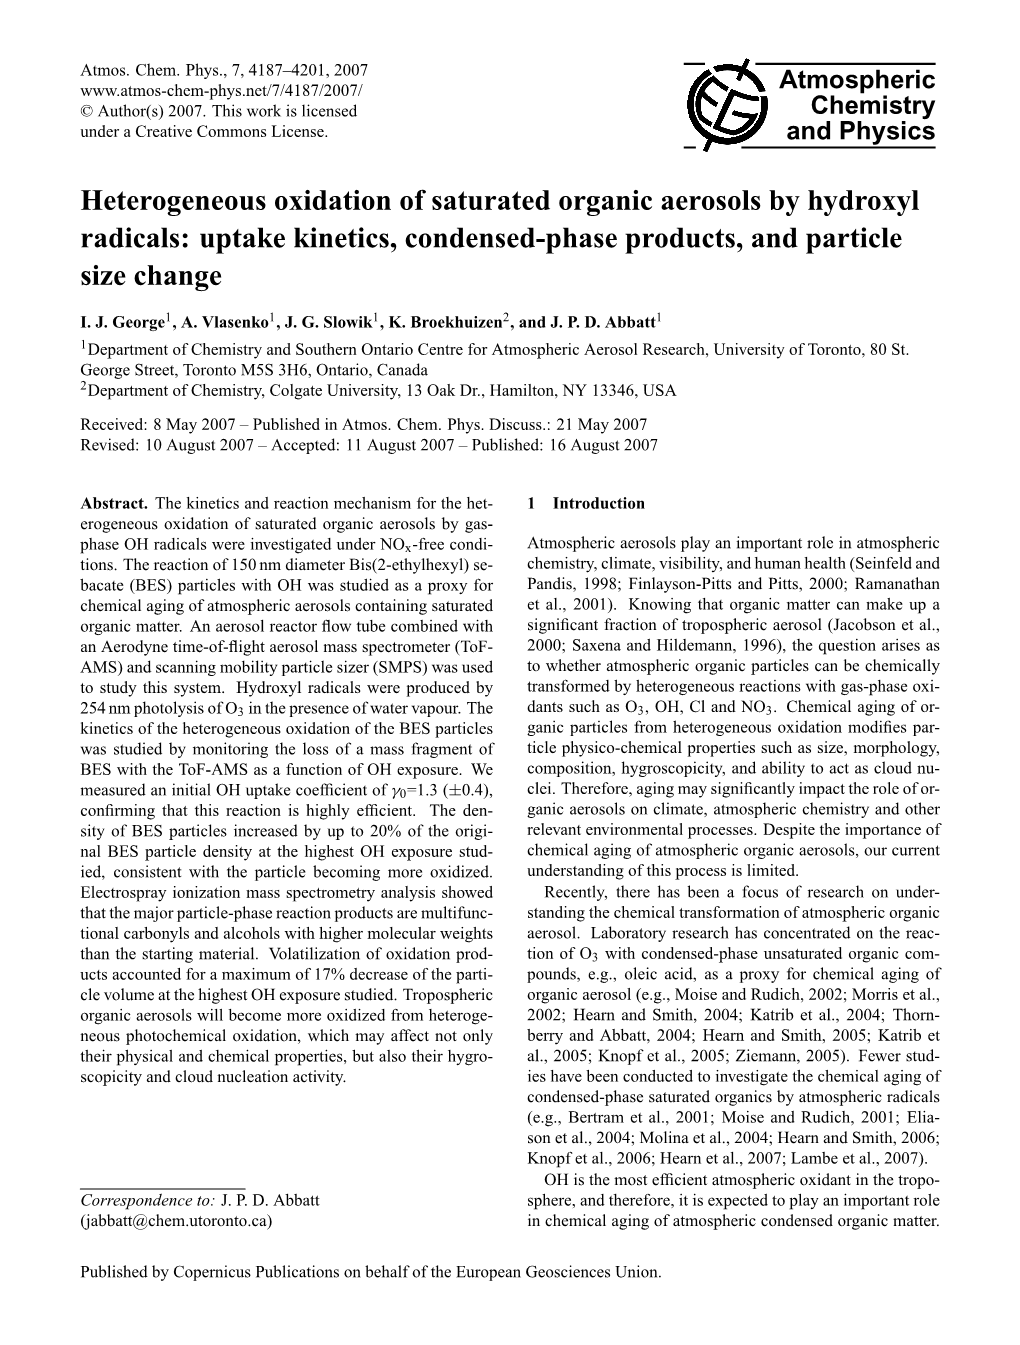 Heterogeneous Oxidation of Saturated Organic Aerosols by Hydroxyl Radicals: Uptake Kinetics, Condensed-Phase Products, and Particle Size Change